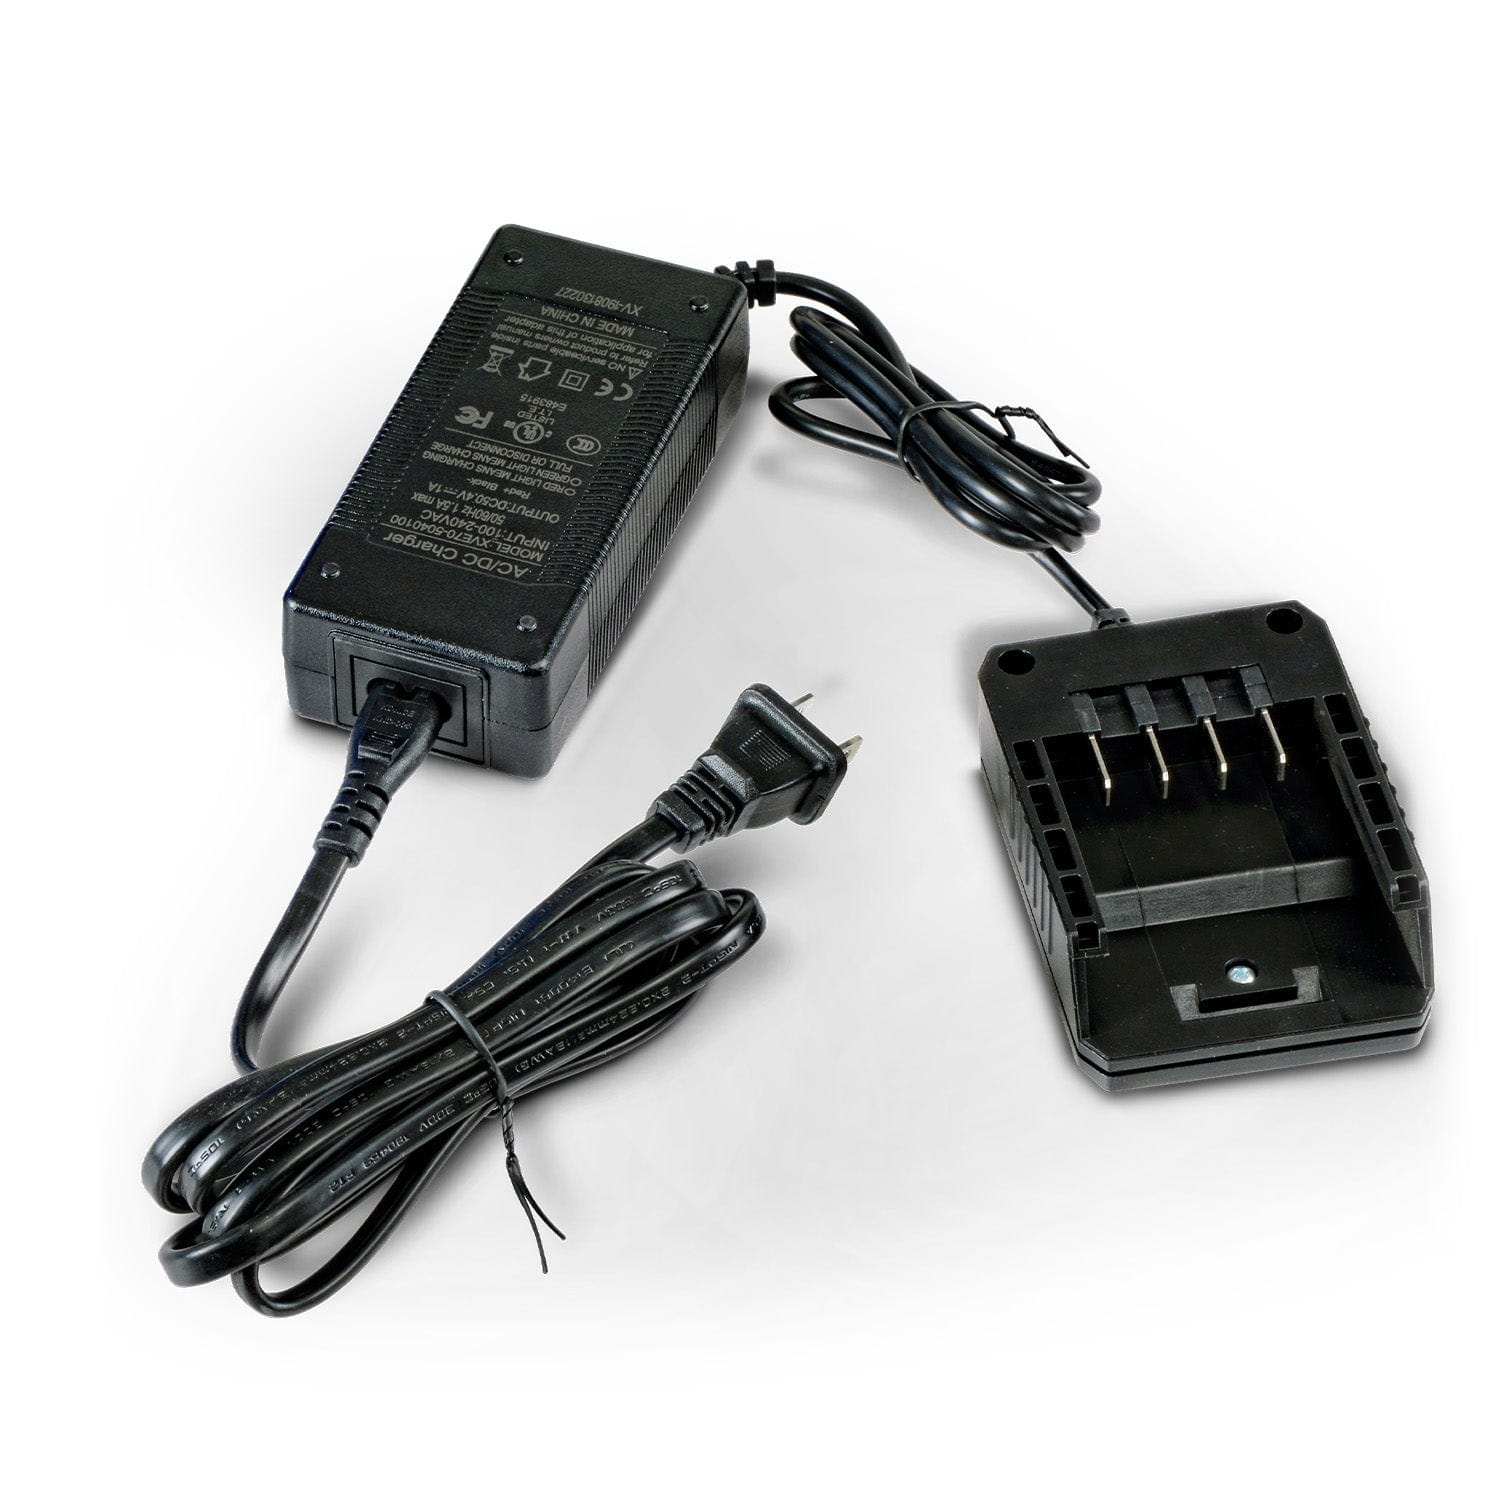 SuperHandy 48V Lithium Ion Battery Charger